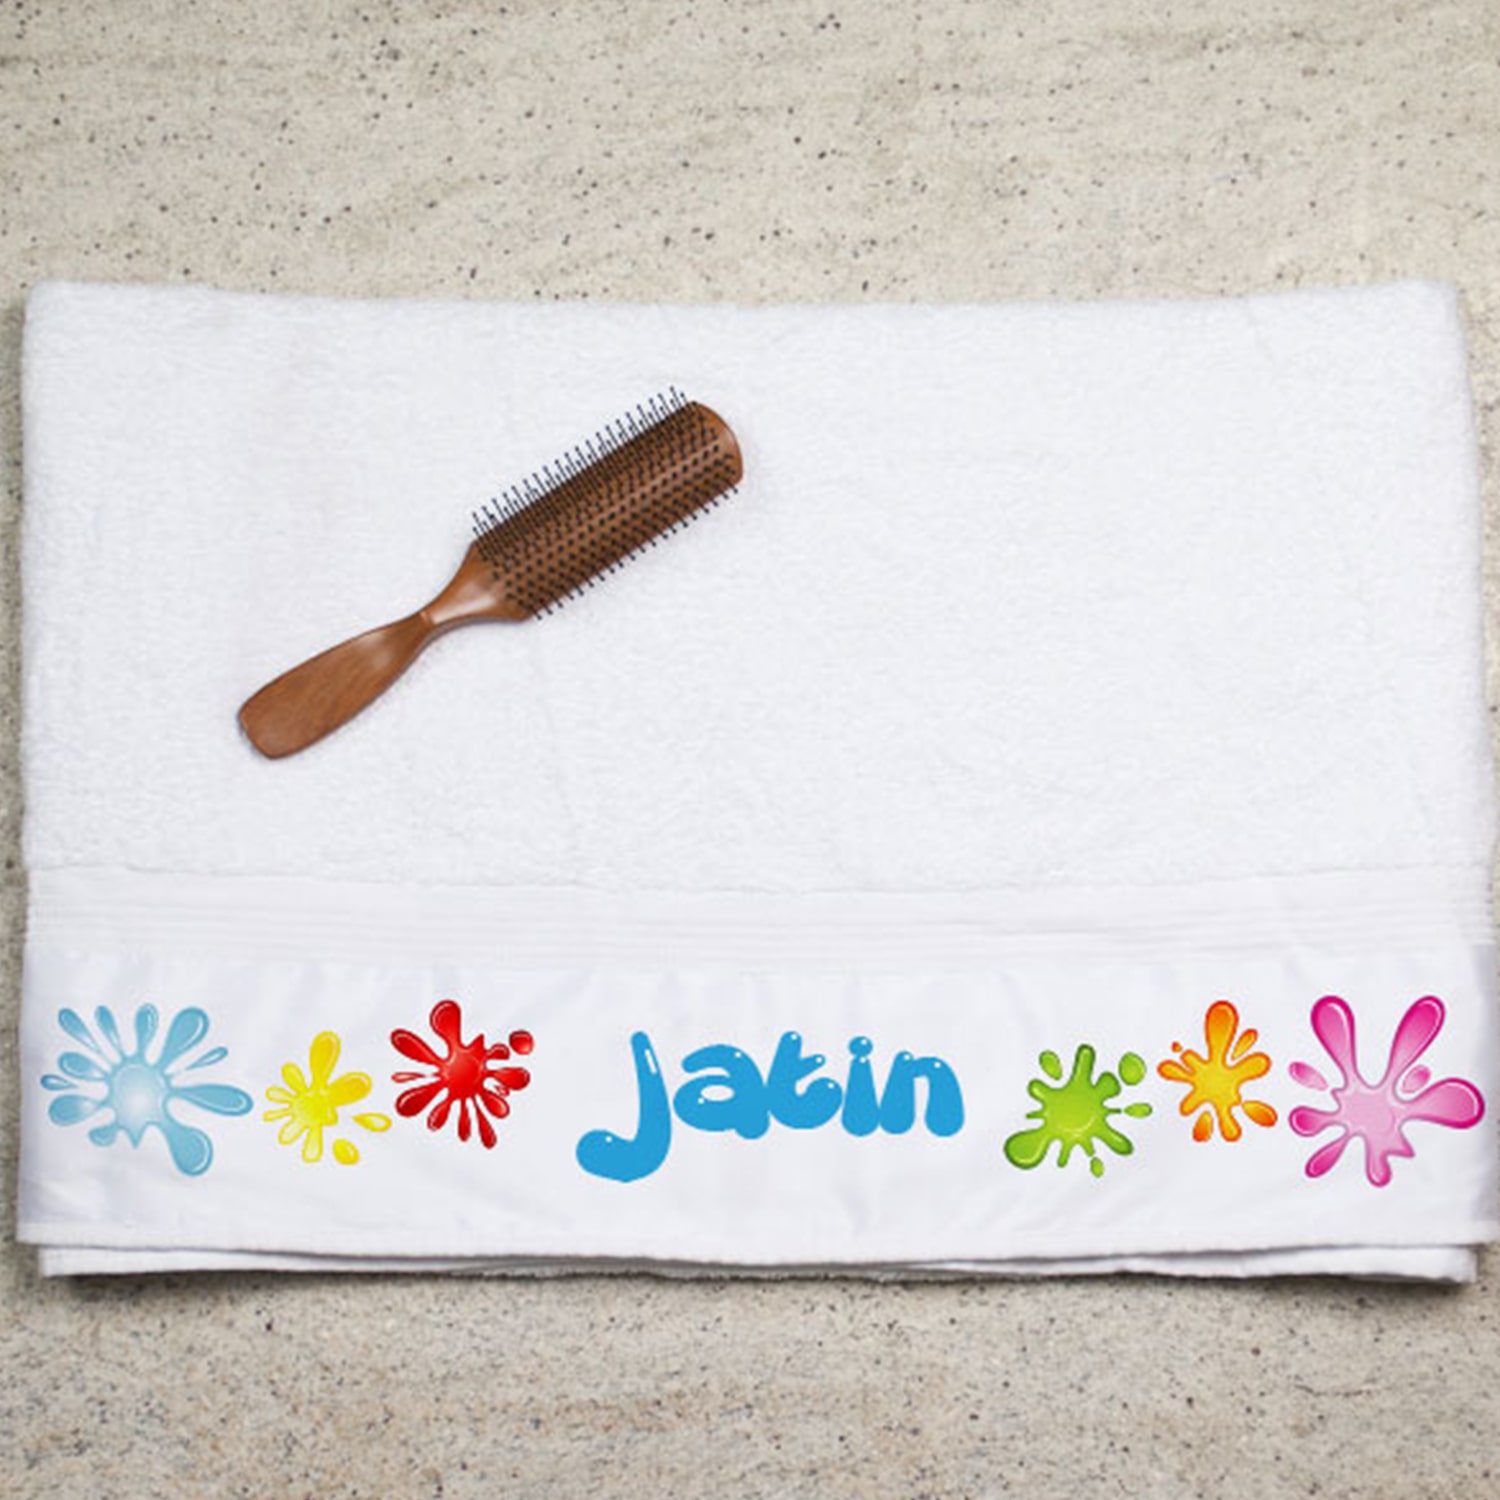 Personalized Bath Towel For Him